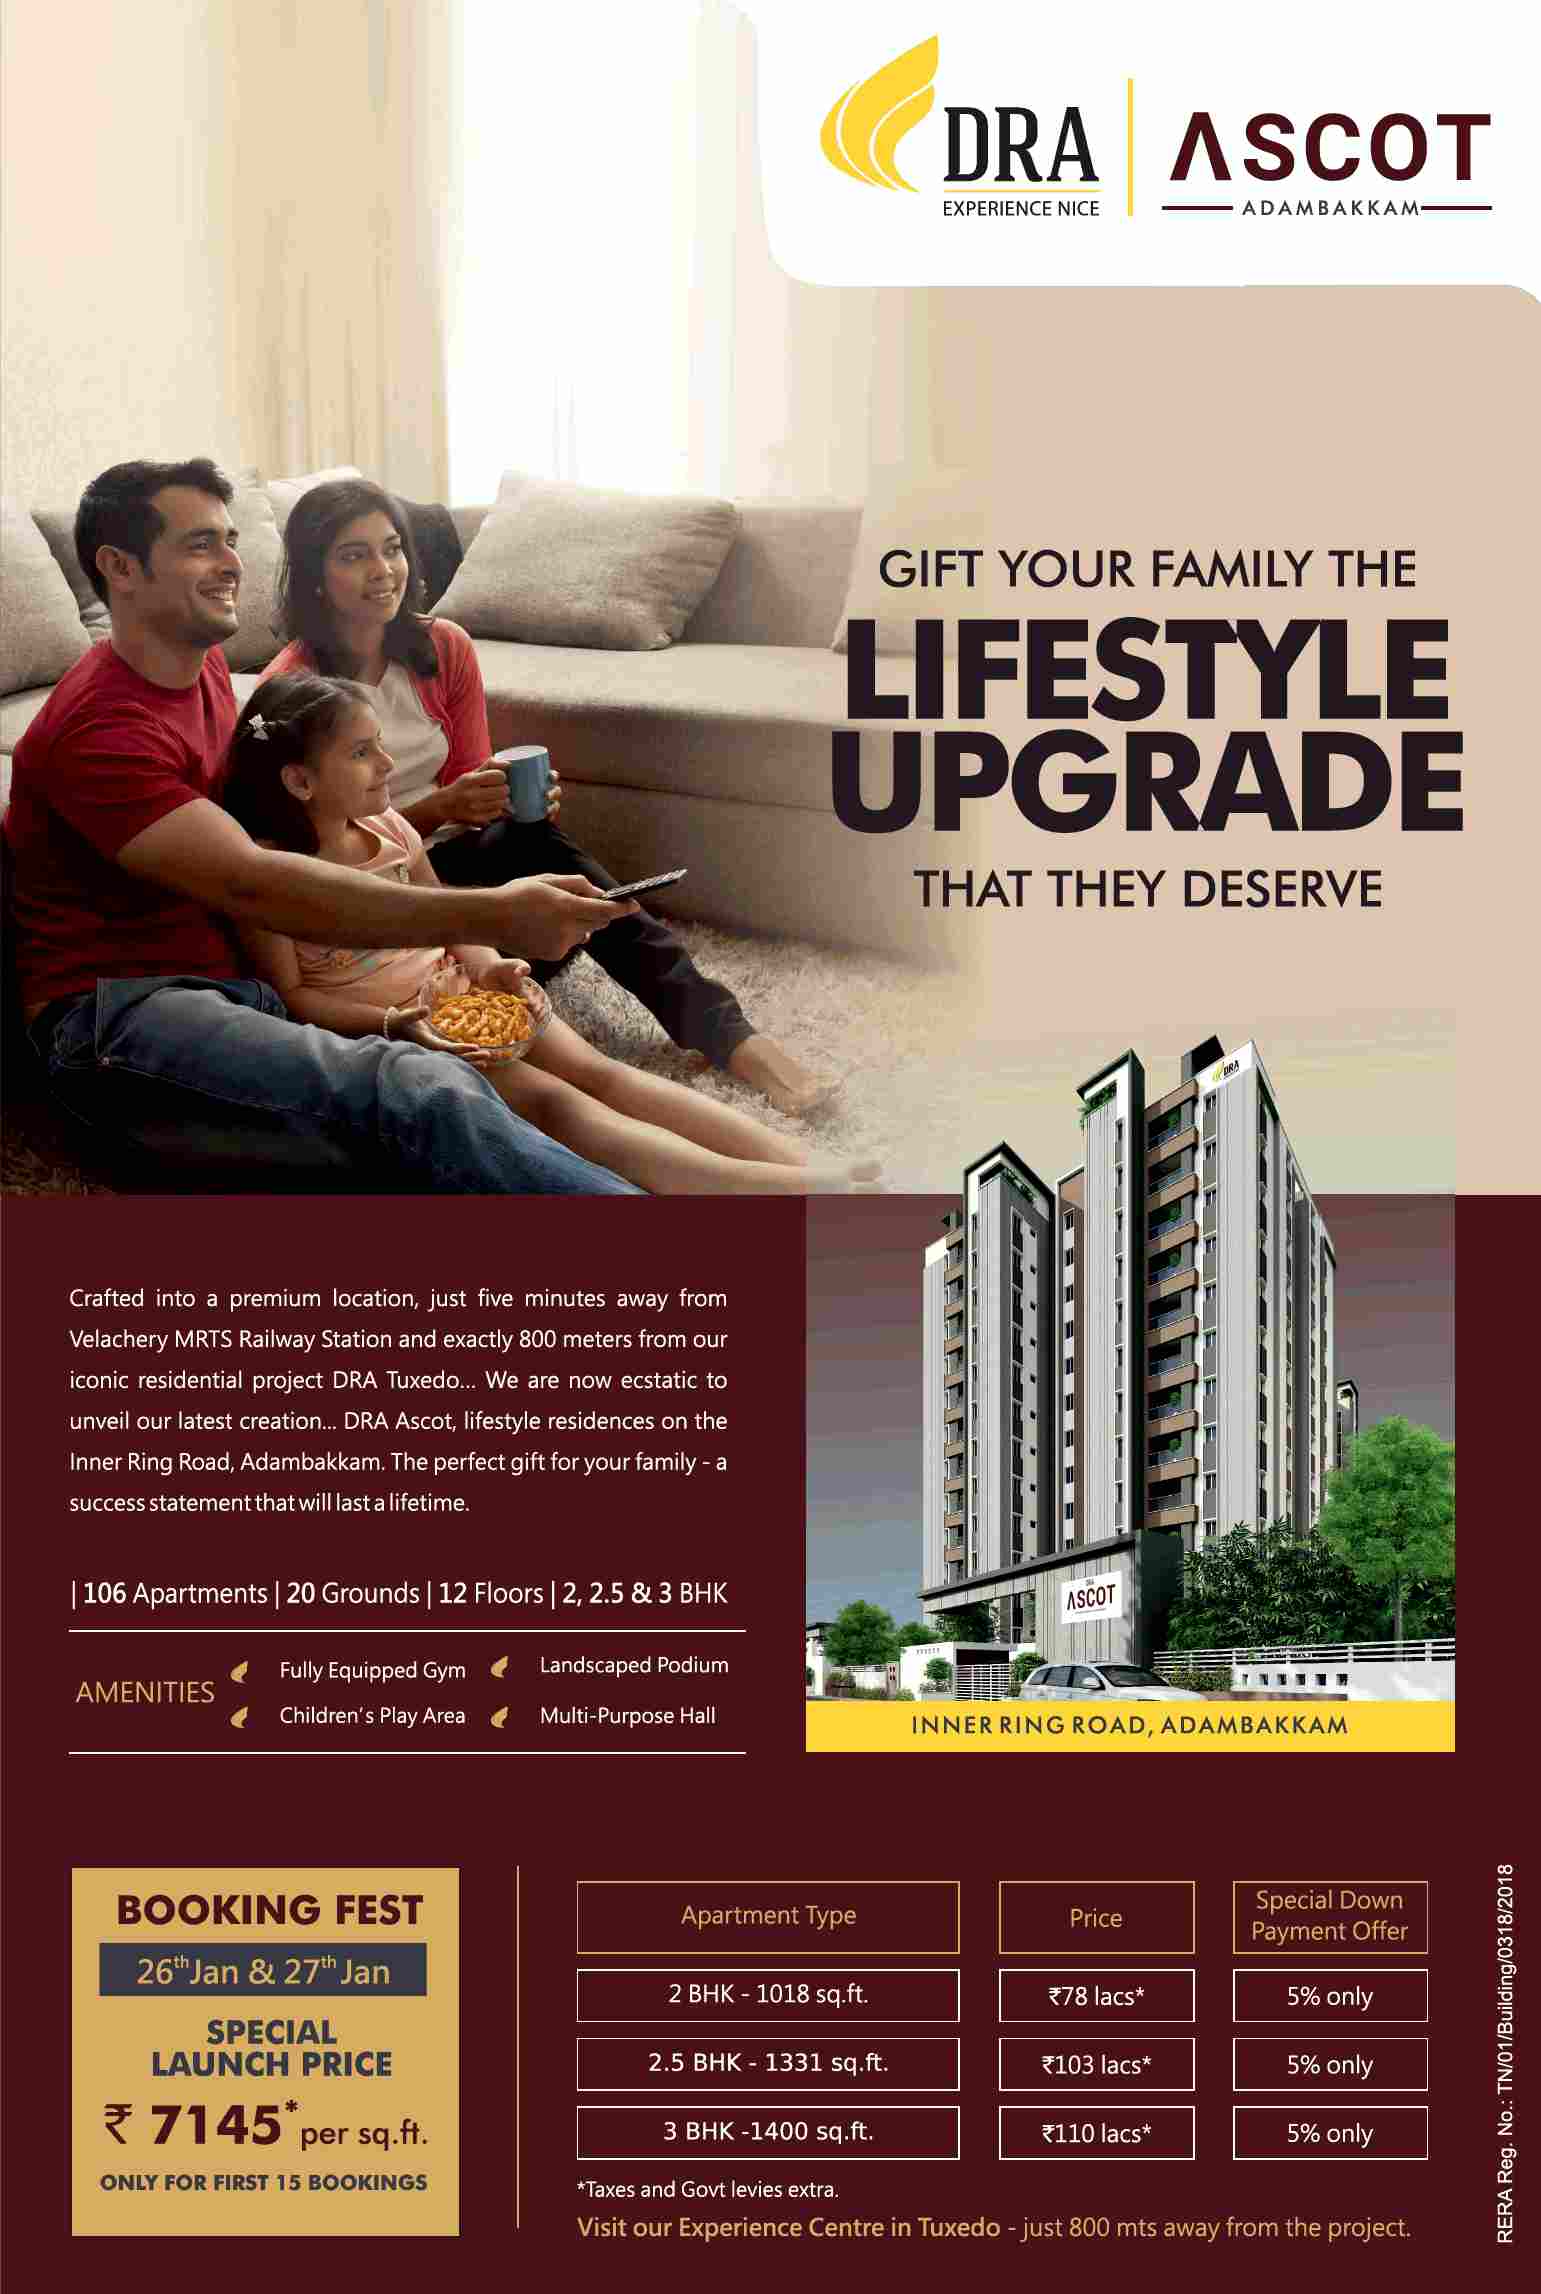 Grab special launch price of Rs 7145 per sqft at DRA Ascot in Chennai Update